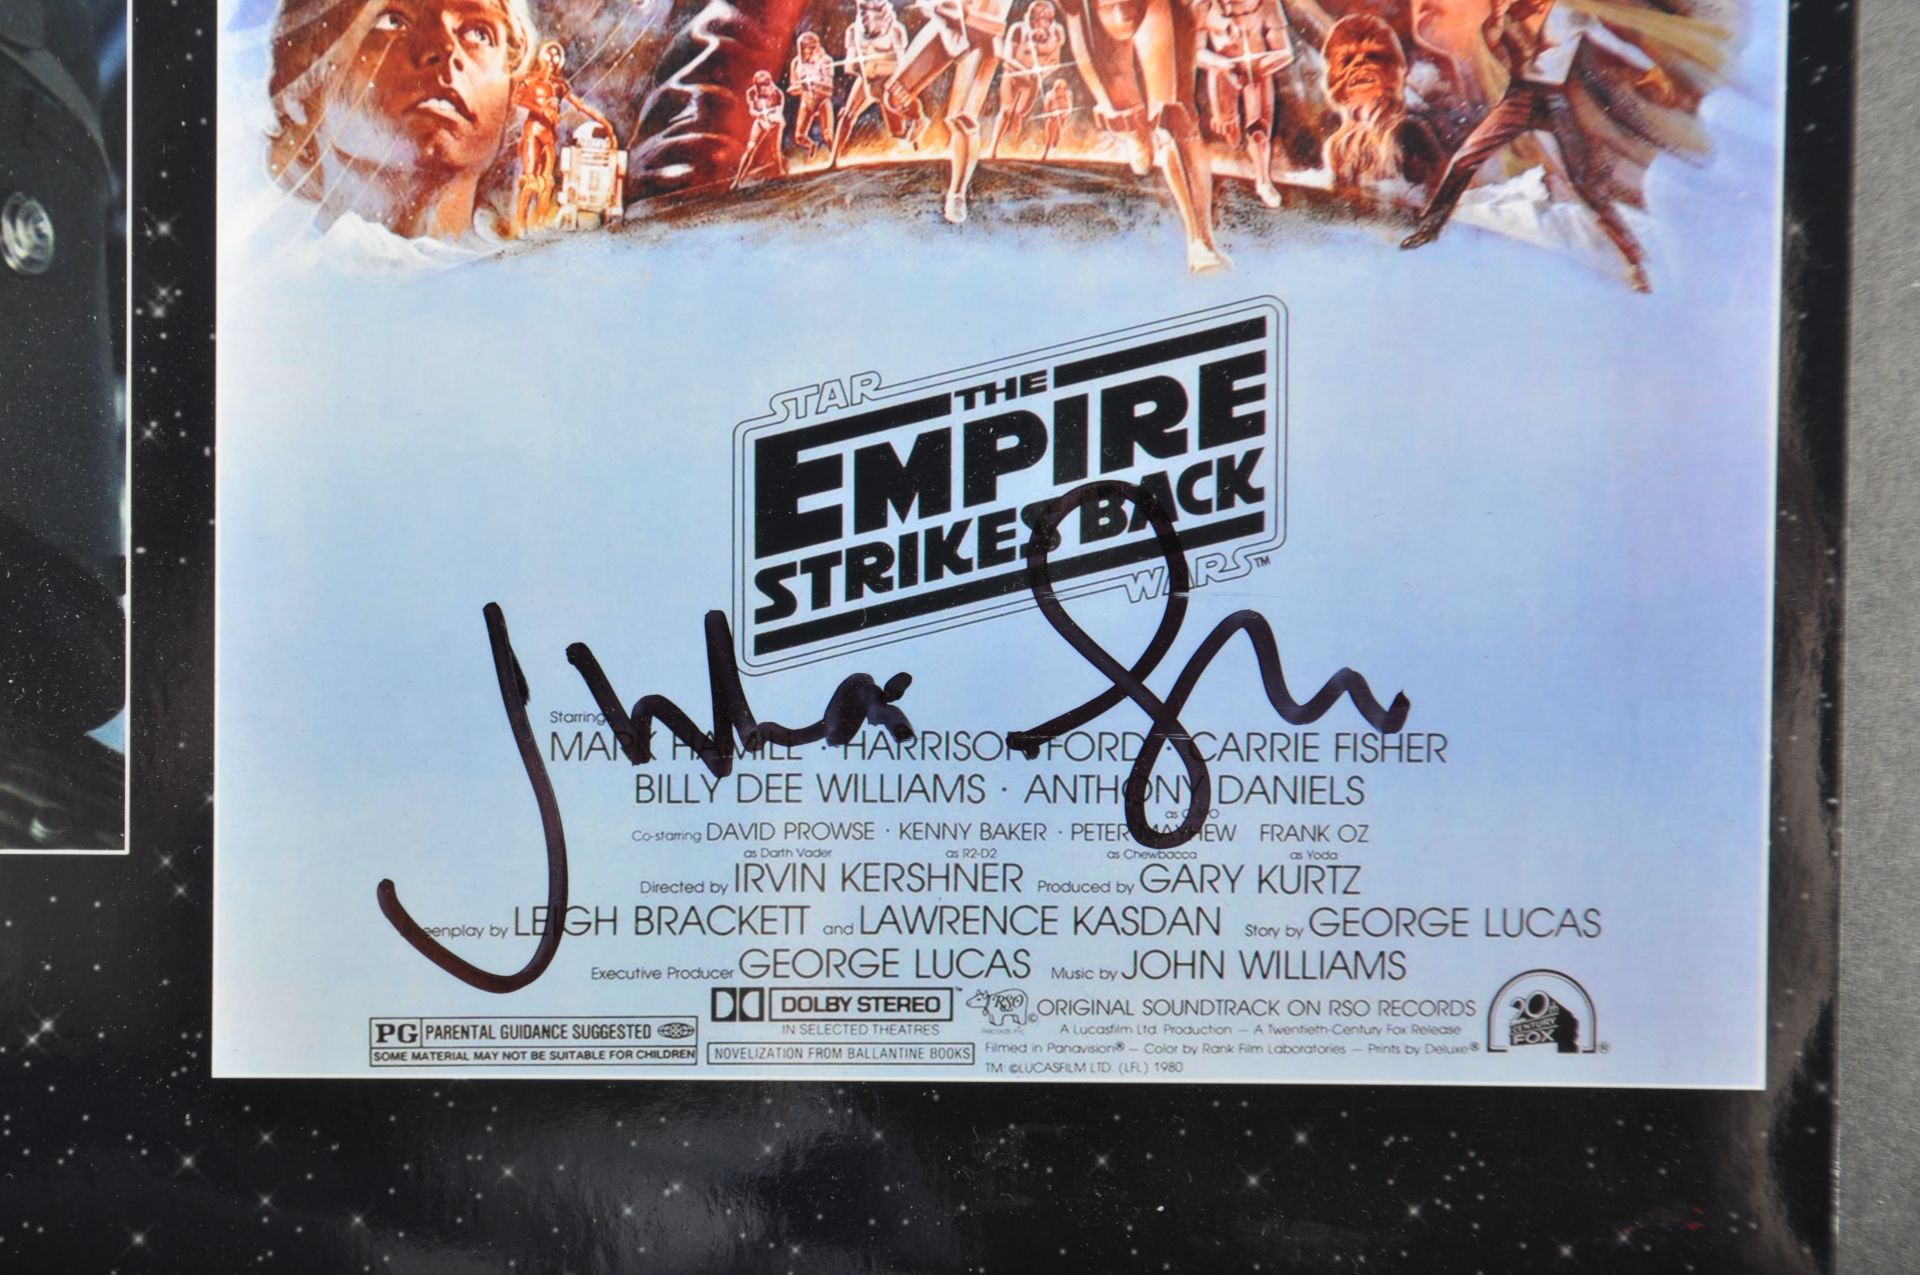 ESTATE OF DAVE PROWSE – STAR WARS OFFICIAL PIX SIGNED PHOTO - Image 2 of 2